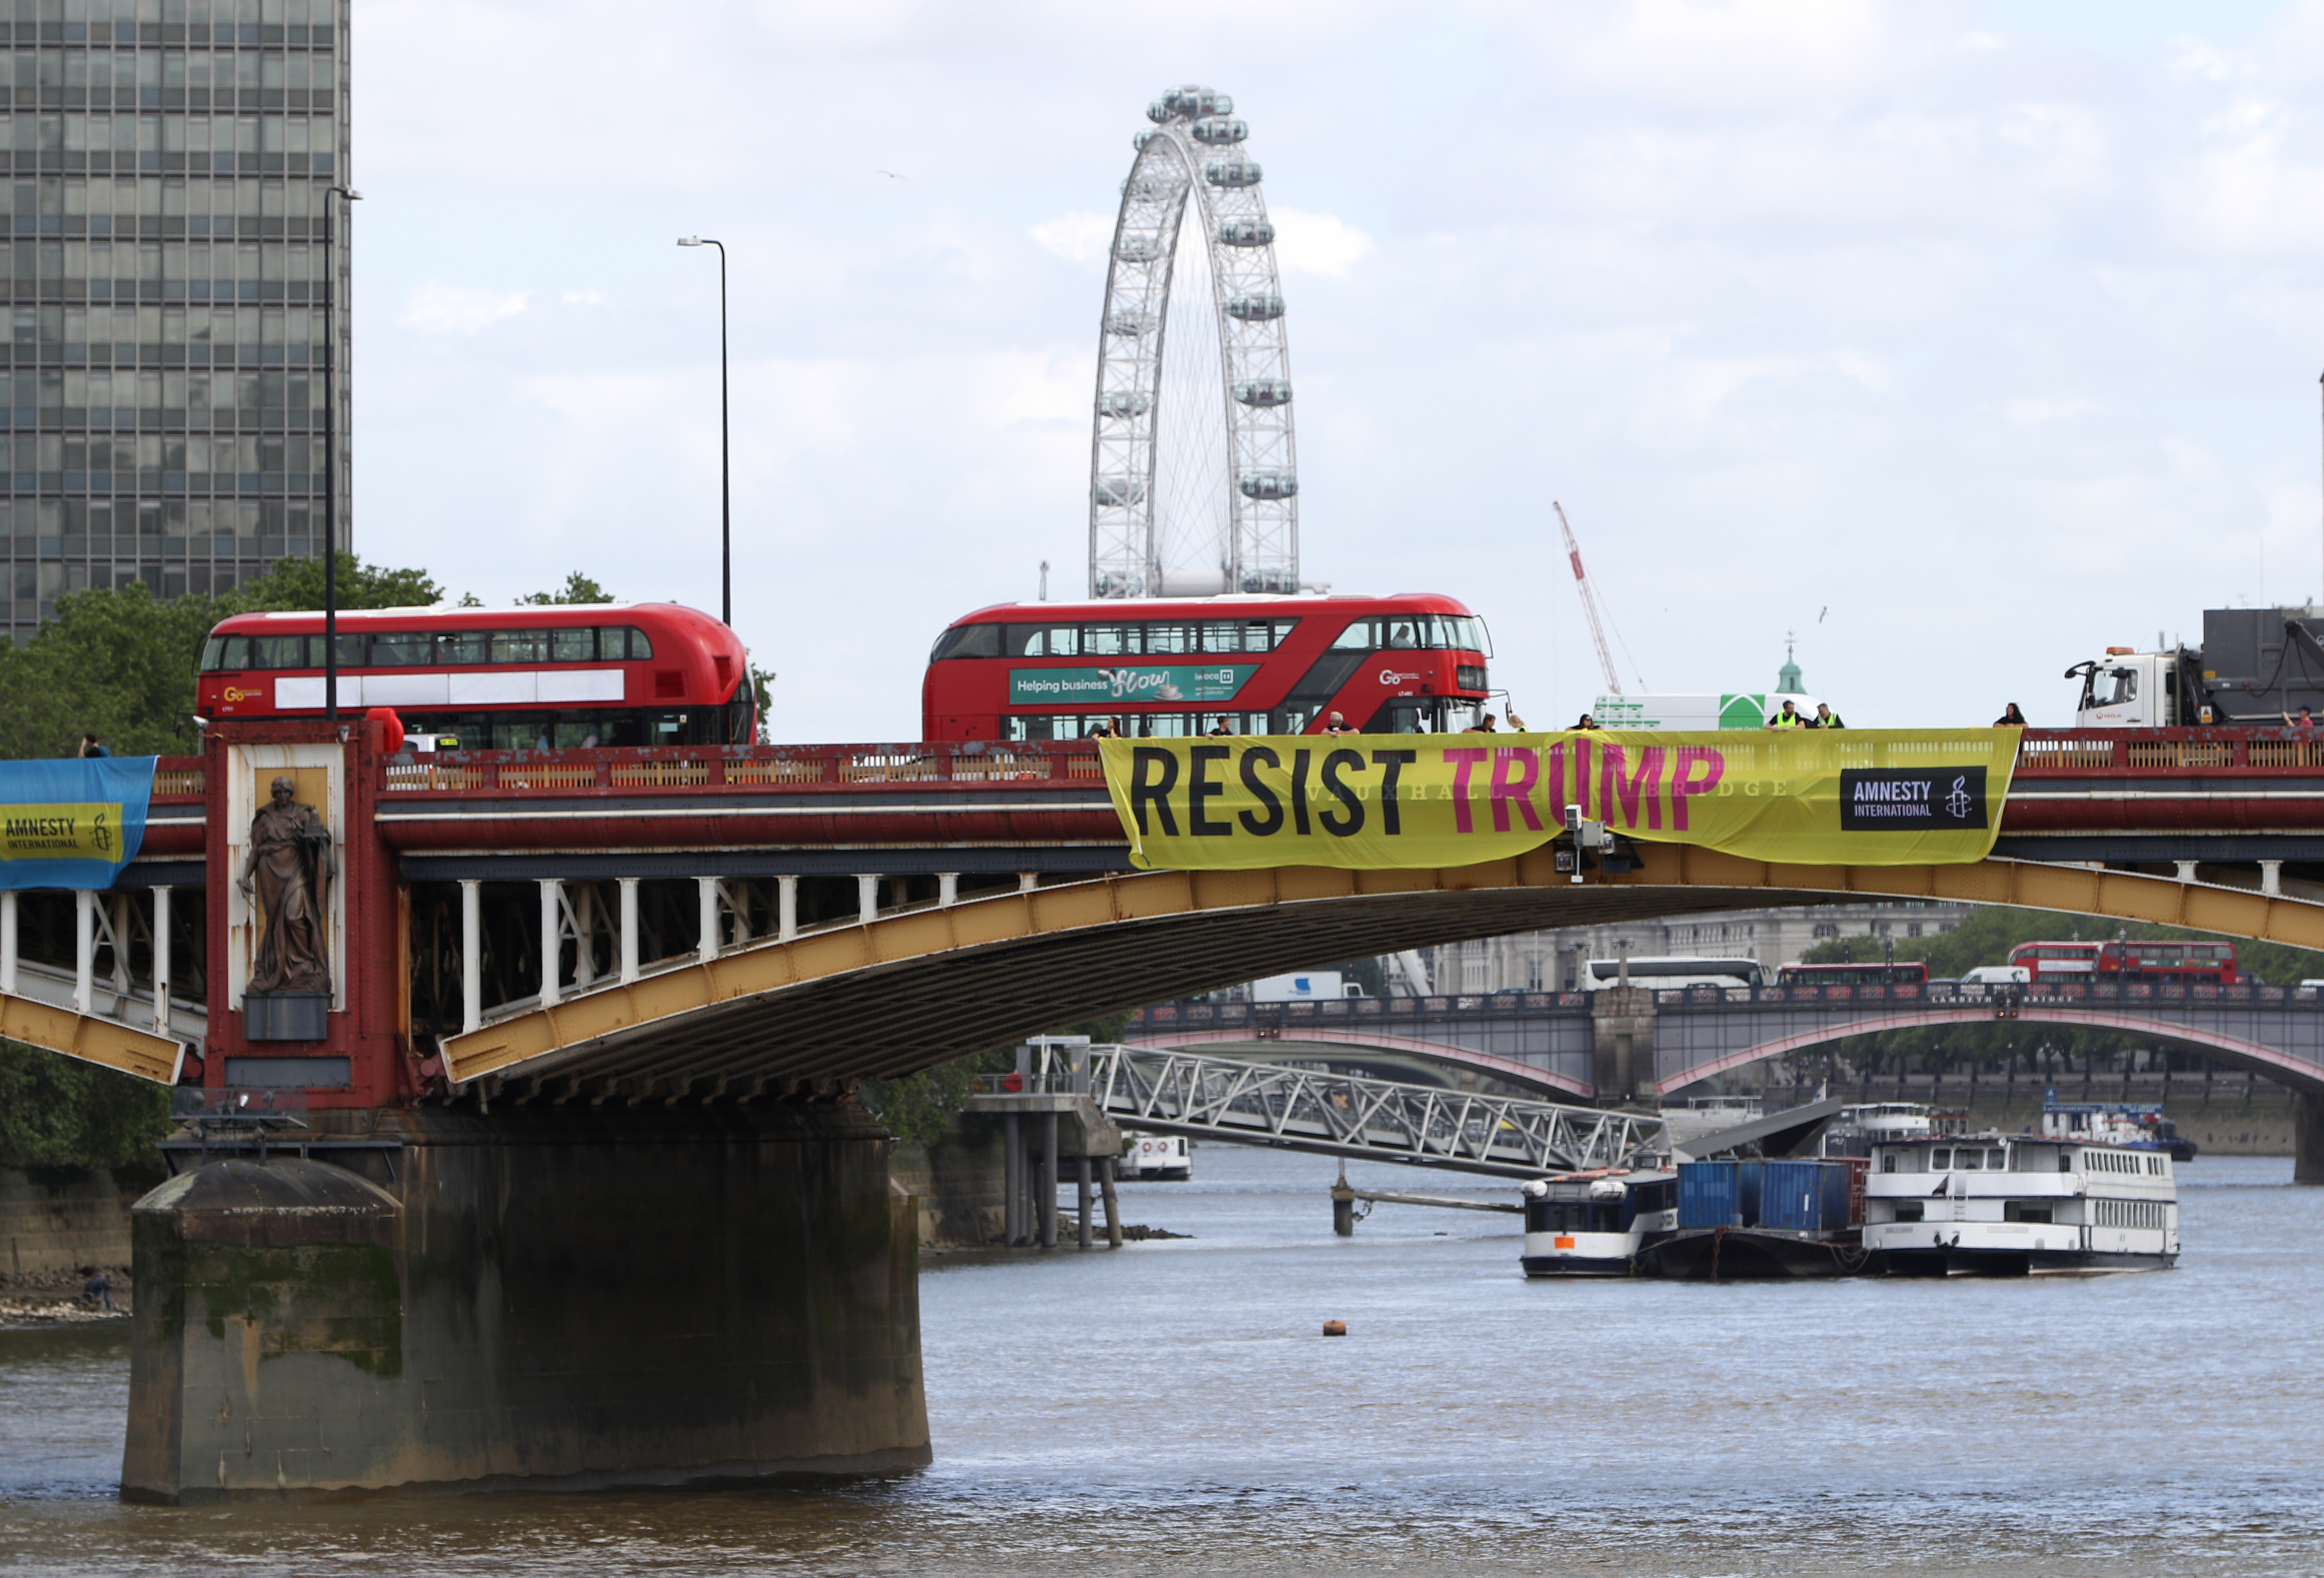 A banner unveiled on Vauxhall Bridge in London on Monday.